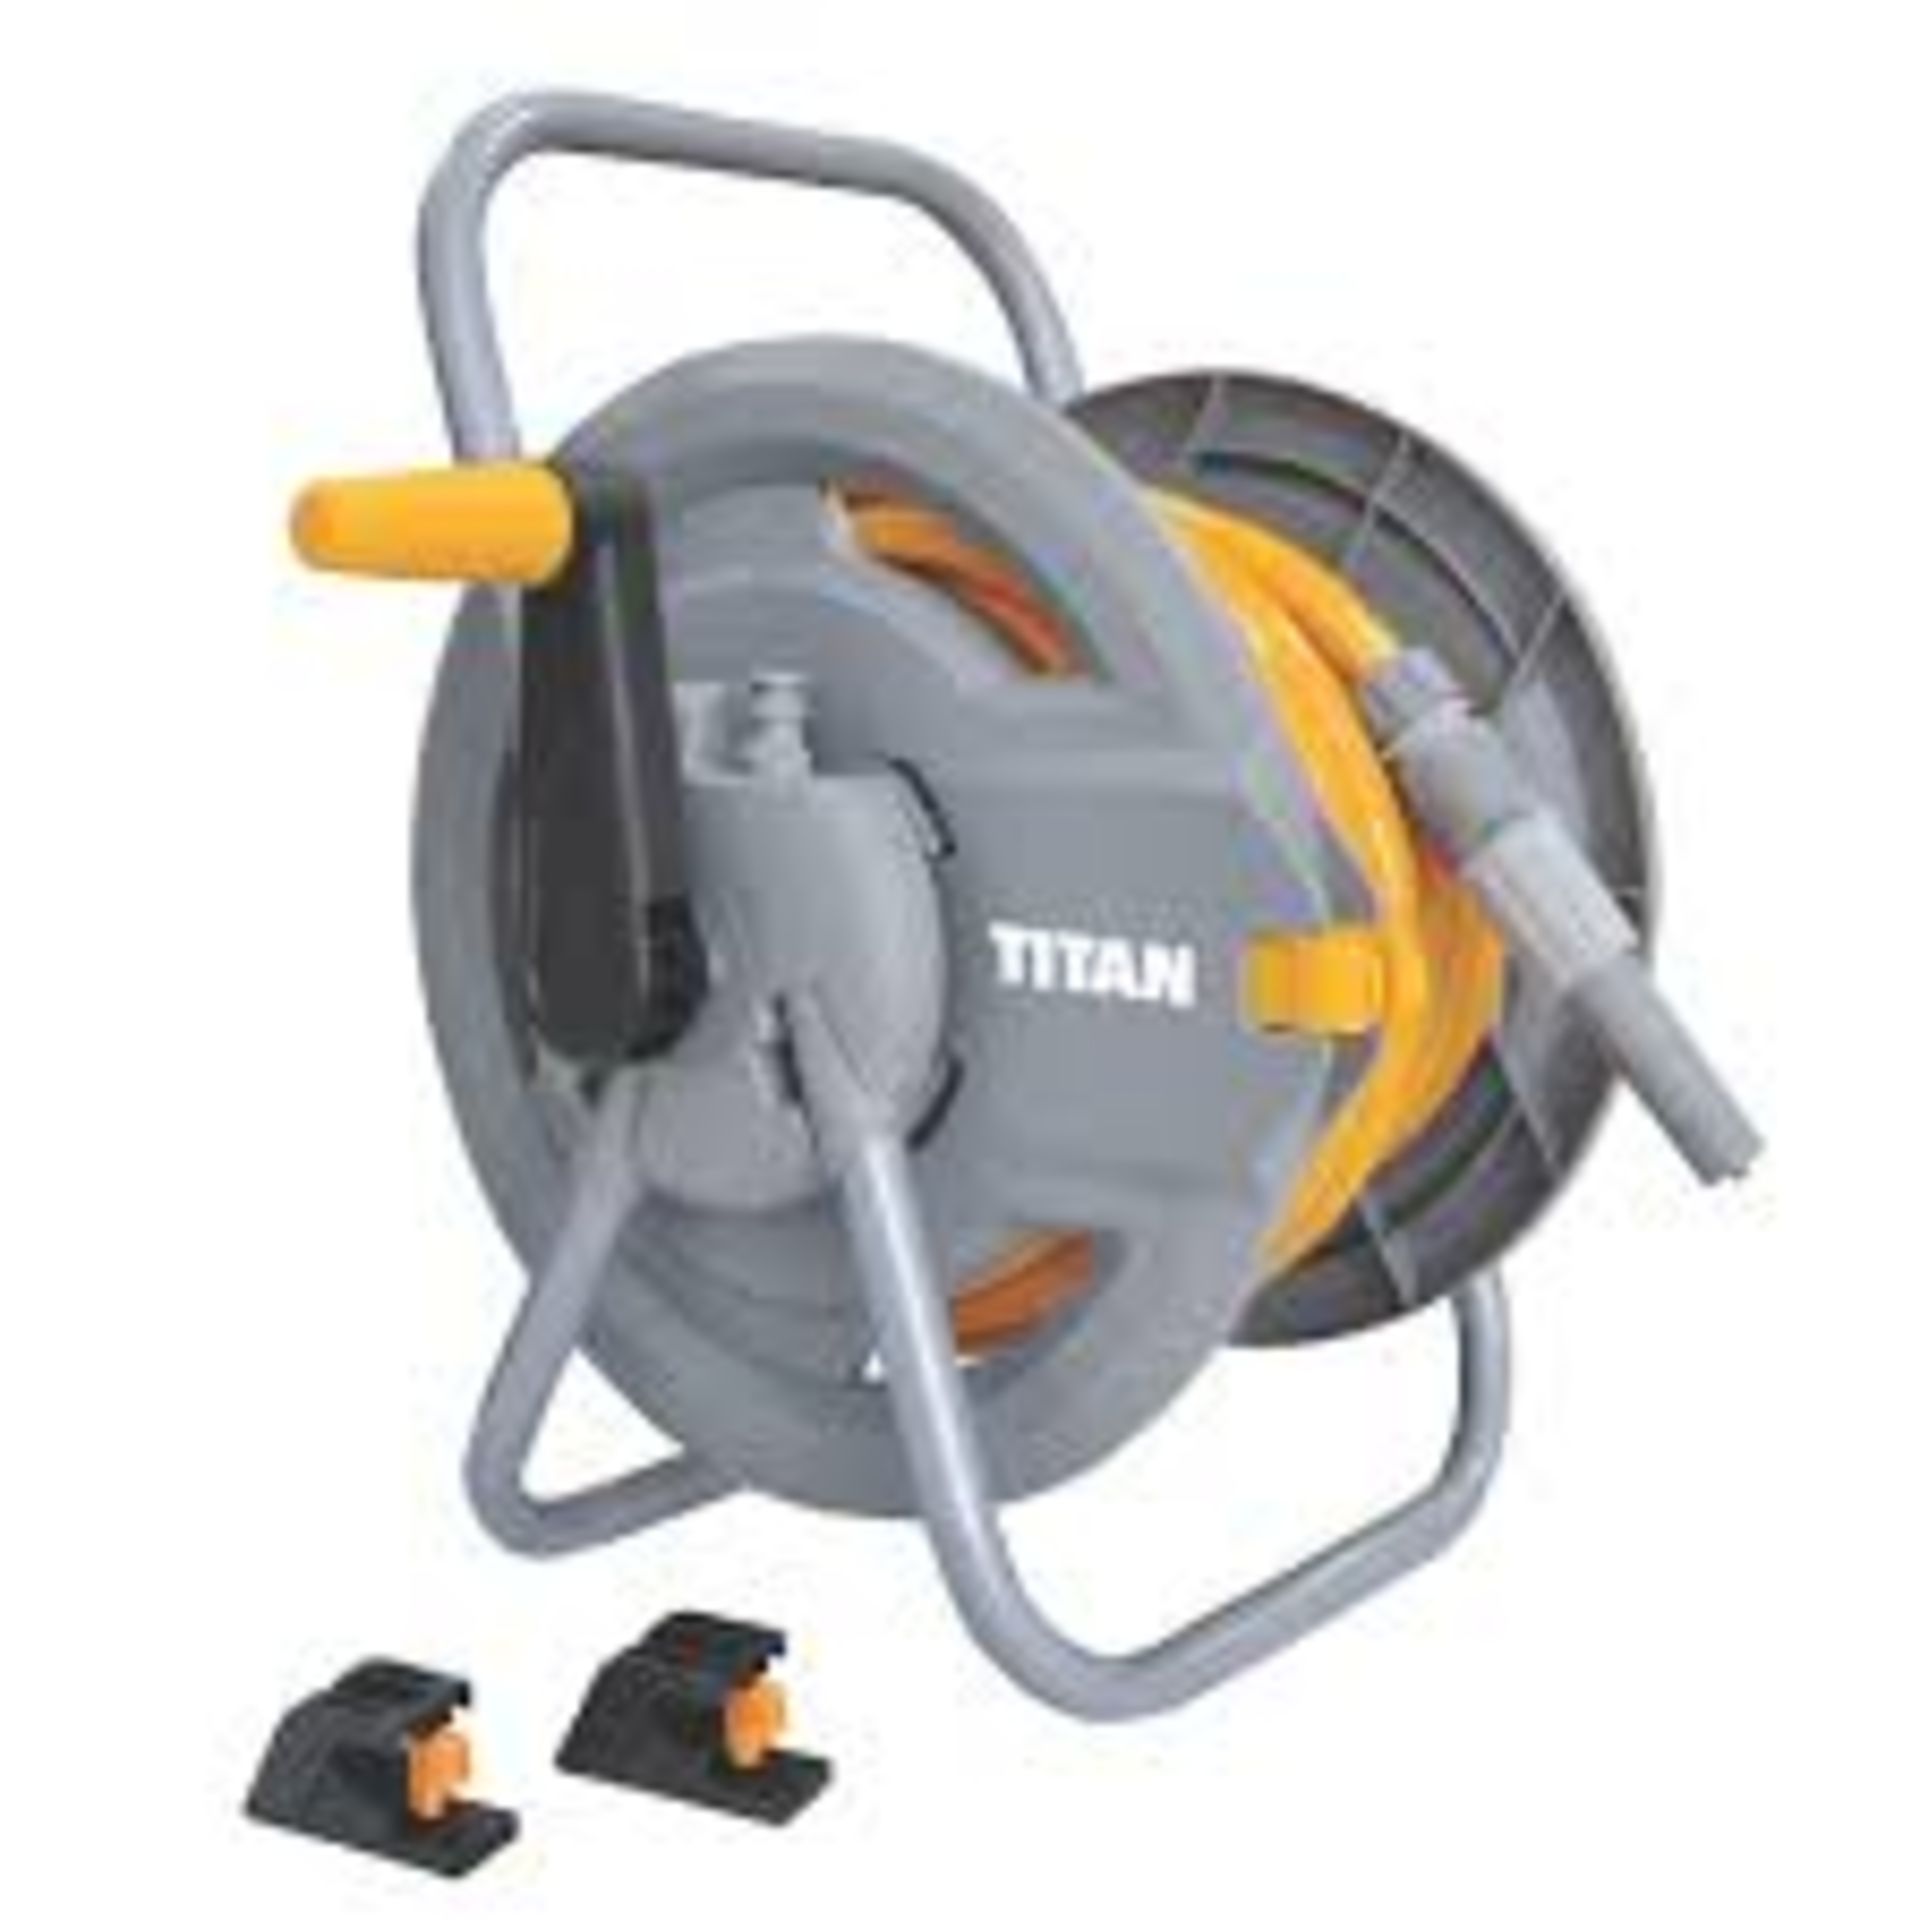 Titan Hose Reel 12.5mm x 25m. - S2.7. Easy-to-assemble hose reel has capacity to store 45m of hose